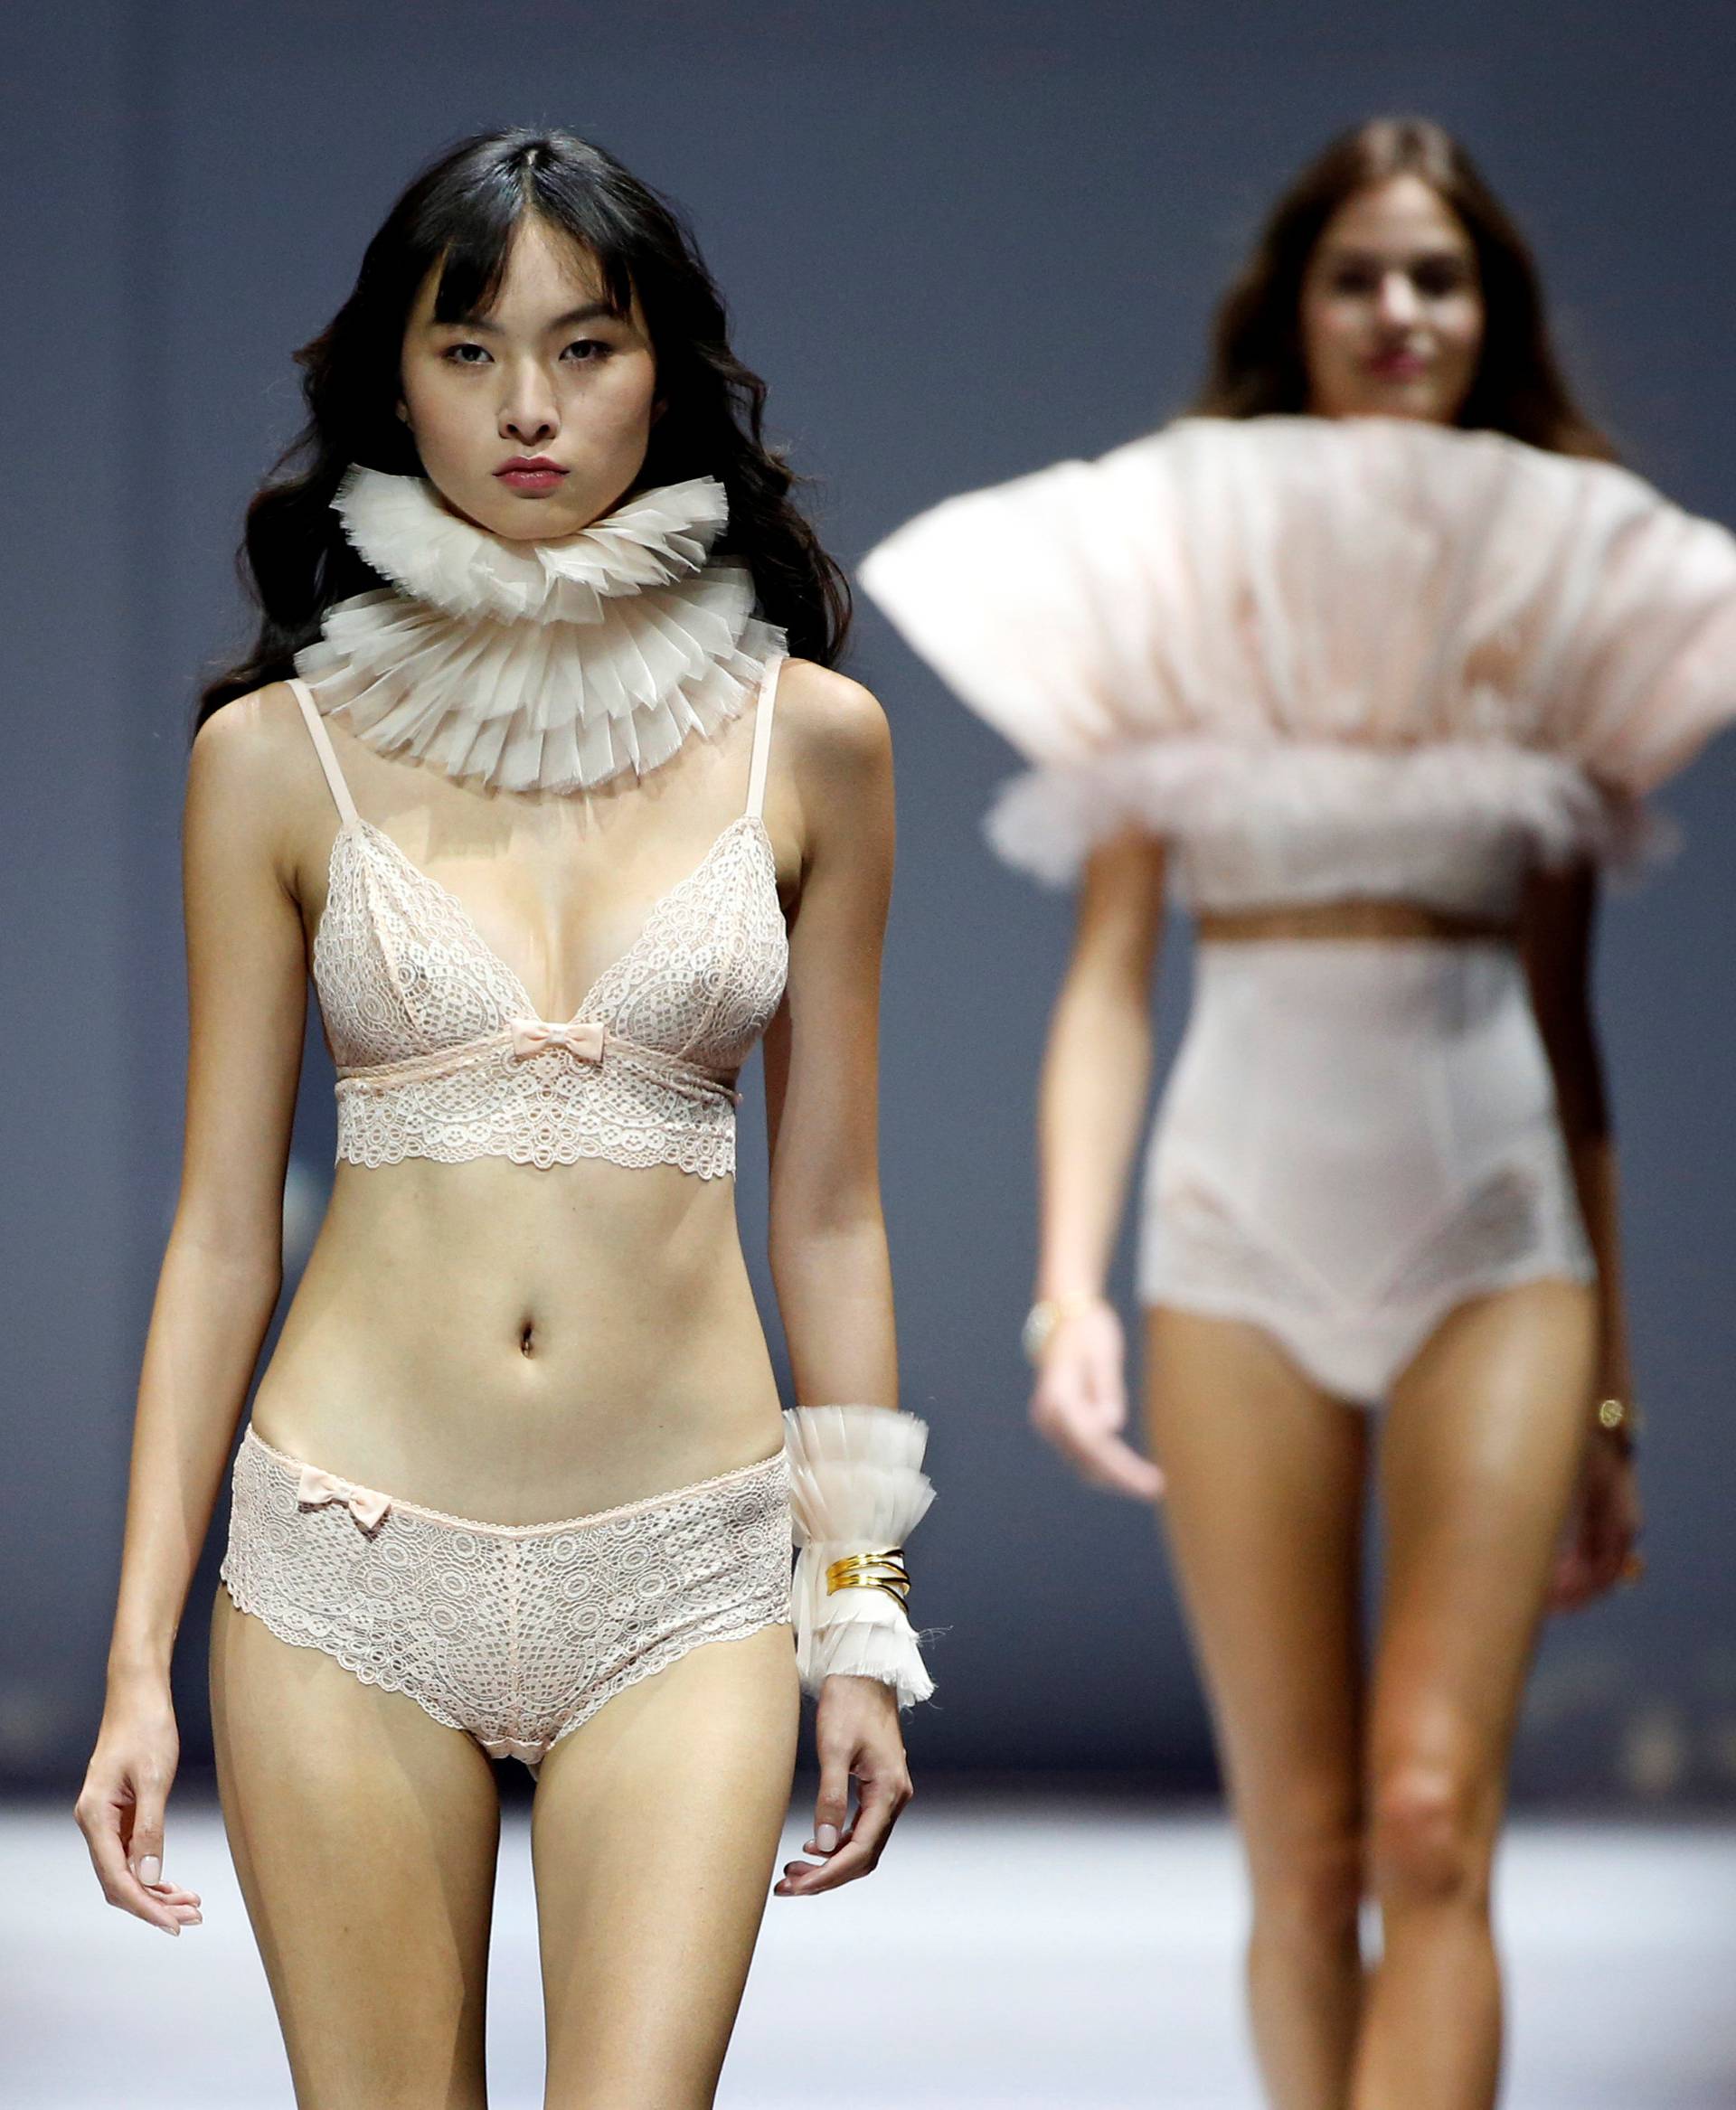 Models present creations during the Etam Live Show Lingerie at the Fashion Week in Paris